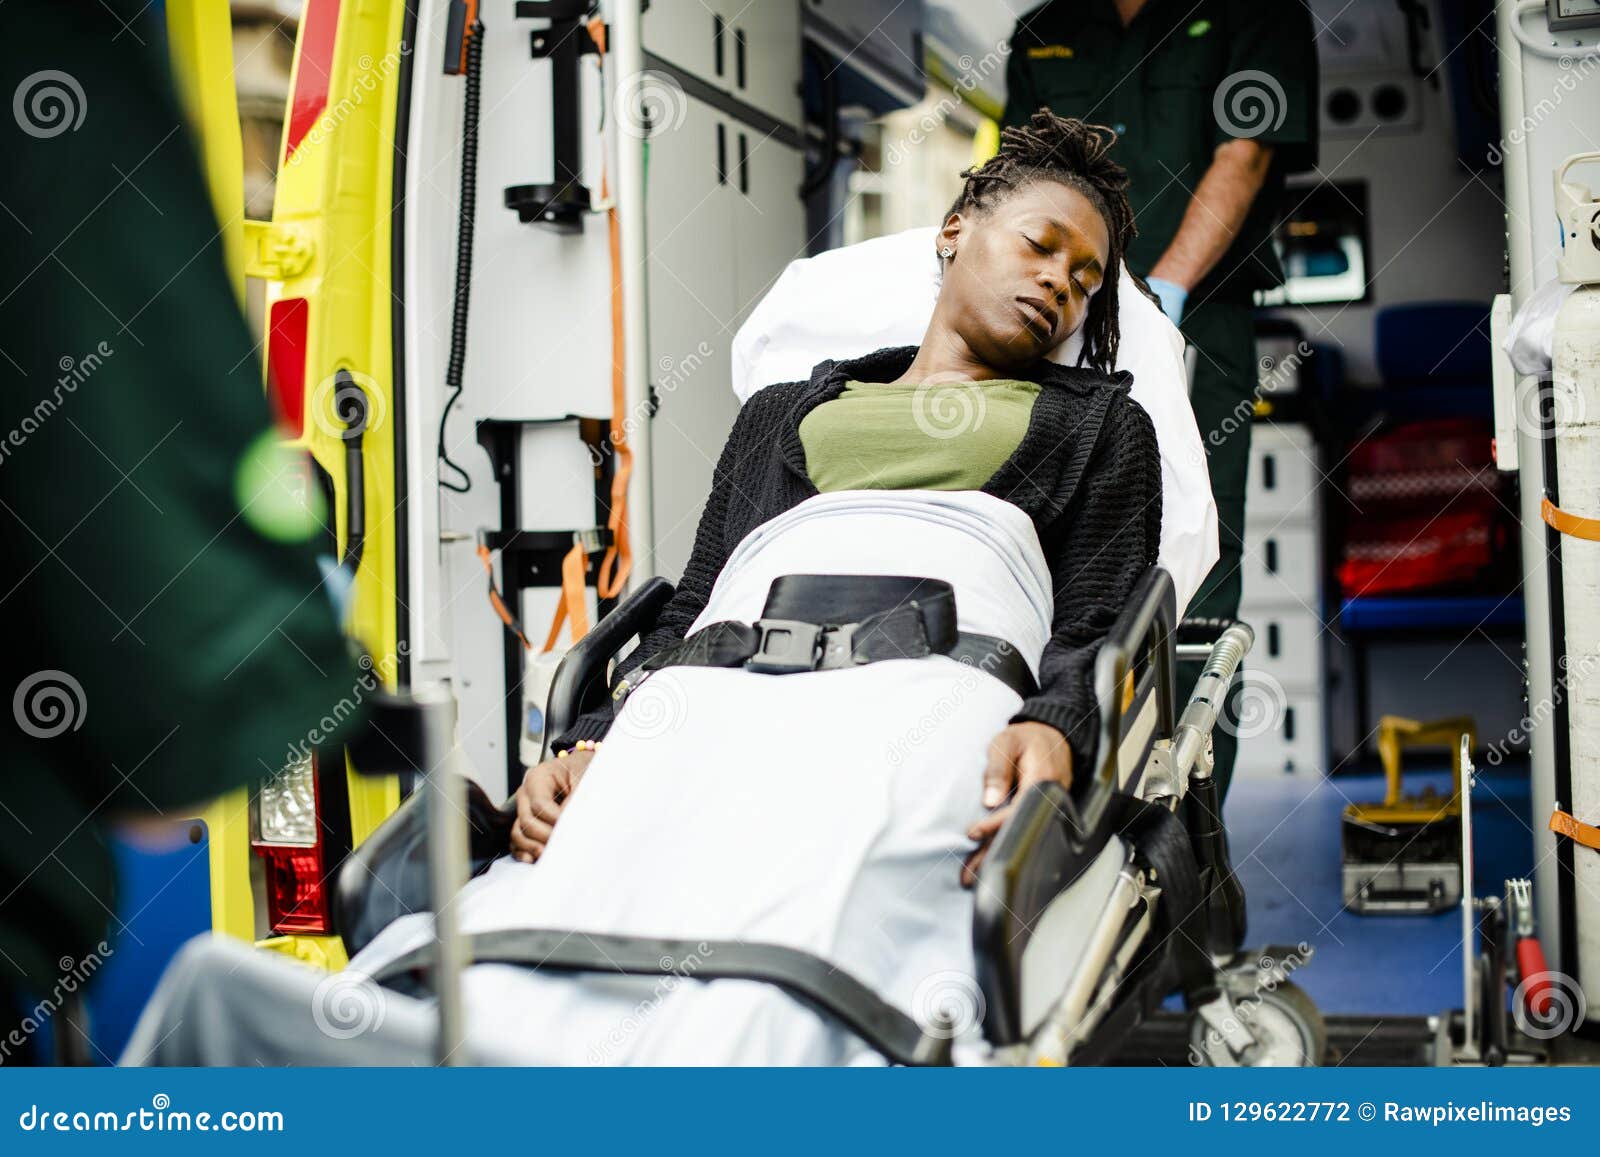 paramedics moving a patient on a stretcher into an ambulance